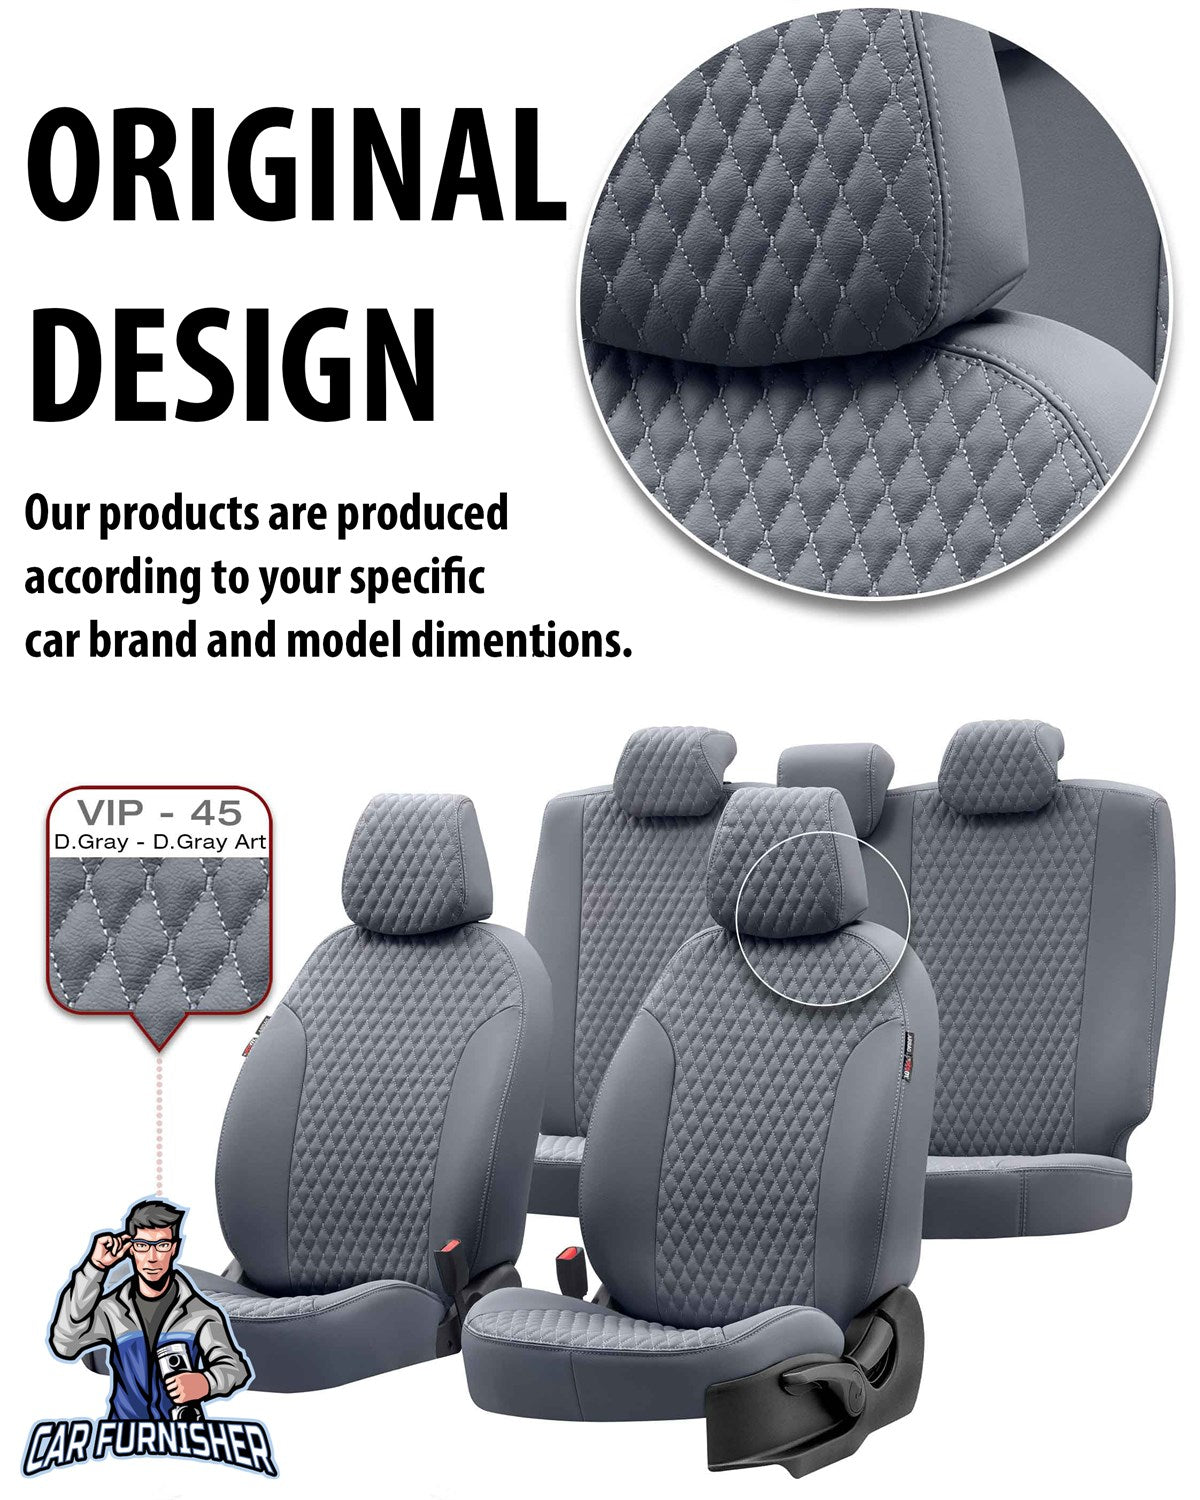 Volkswagen Sharan Seat Cover Amsterdam Leather Design Smoked Black Leather